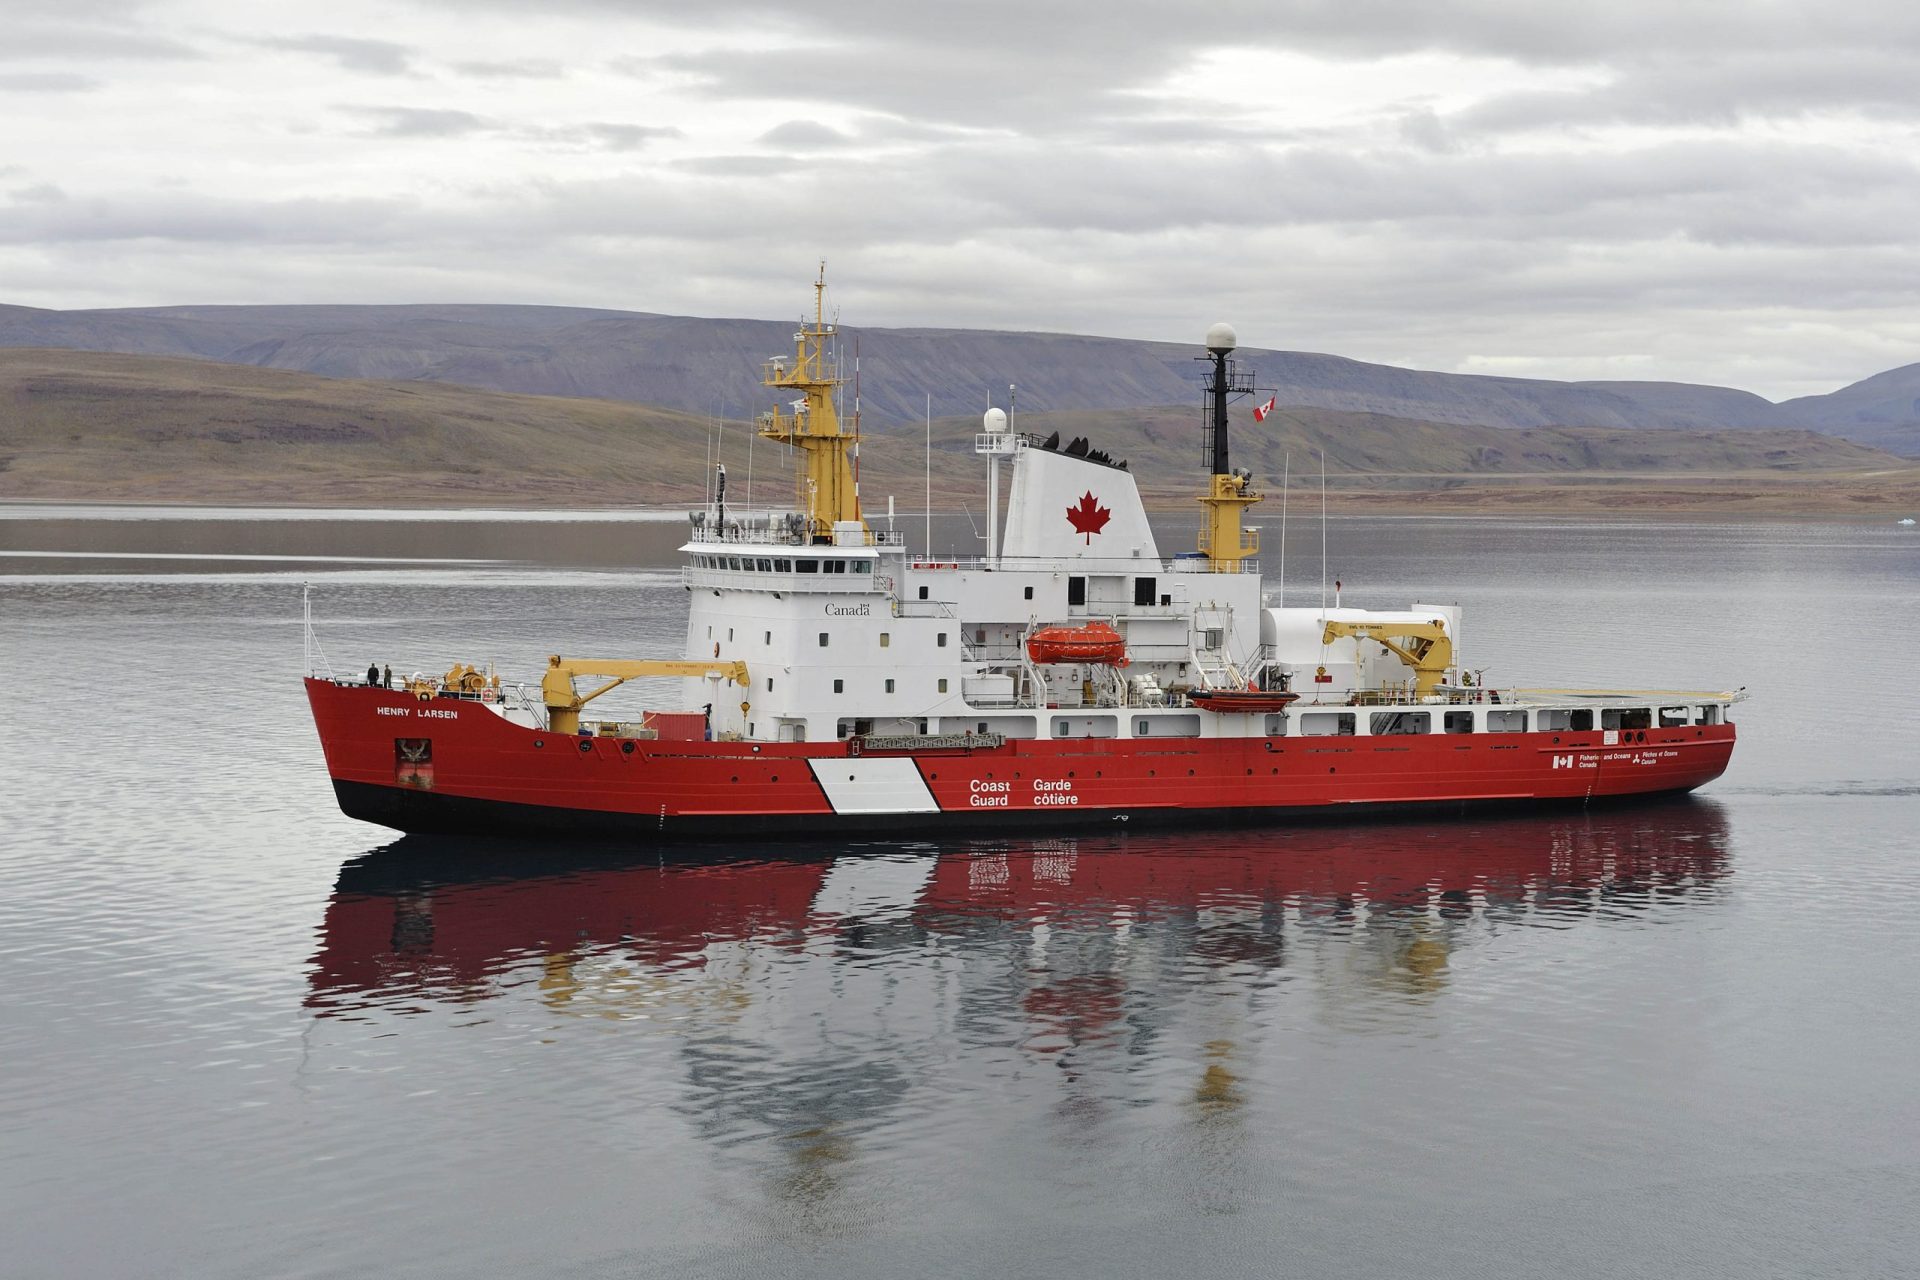 HS2010-H003-10422 August 2010CCGS Henry LarsenCanadian Coast Guard Ship Henry Larsen in Strathcona Sound near Nanisivik, Nunavut Territory, during Operation NANOOK.   Operation NANOOK is one of three major recurring sovereignty operations conducted annually by the Canadian Forces (CF) in Canada's Arctic.  Planned and directed by Joint Task Force North (JTFN) the whole-of-government operation highlights interoperability, command and control, and cooperation with interdepartmental and intergovernmental partners in the North.  Operation NANOOK 10 takes place in Canada's Eastern and High Arctic area from August 6 to 26 and includes two major exercises, Exercise NATSIQ, a sovereignty and presence patrolling exercise of military resources, and Exercise TALLURUTIIT a whole-of -government exercise that focuses on environmental containment and remediation resulting from a simulated fuel spill.Operation NANOOK 10, as a combined, joint and integrated operation engages personnel and resources (ships and aircraft) from: the Canadian Navy, the Canadian Army, Canada's Air Force and CF Special Forces; other federal government departments to include Public Safety, the Royal Canadian Mounted Police, the Canadian Coast Guard (central and Arctic region), Transport Canada, Indian and Northern Affairs Canada, Natural Resources Canada, Environment Canada, Parks Canada, the Government of Nunavut; the municipal communities of Resolute Bay, Pond Inlet, Grise Fjord, Iqaluit and Arctic Bay; and internationally the US Navy's 2nd Fleet, the US Coast Guard and the Royal Danish Navy.Photo: Corporal Rick Ayer, Formation Imaging Services, Halifax, Nova Scotia.© 2010 DND-MDN Canada~HS2010-H003-10422 août 2010NGCC HENRY LARSENLe Navire de la Garde côtière canadienne (NGCC) HENRY LARSEN dans la baie Strathcona près de Nanisivik, au Nunavut, lors de l’opération Nanook. L’opération Nanook est l’une des trois principales opérations de protection du territoire menées annue